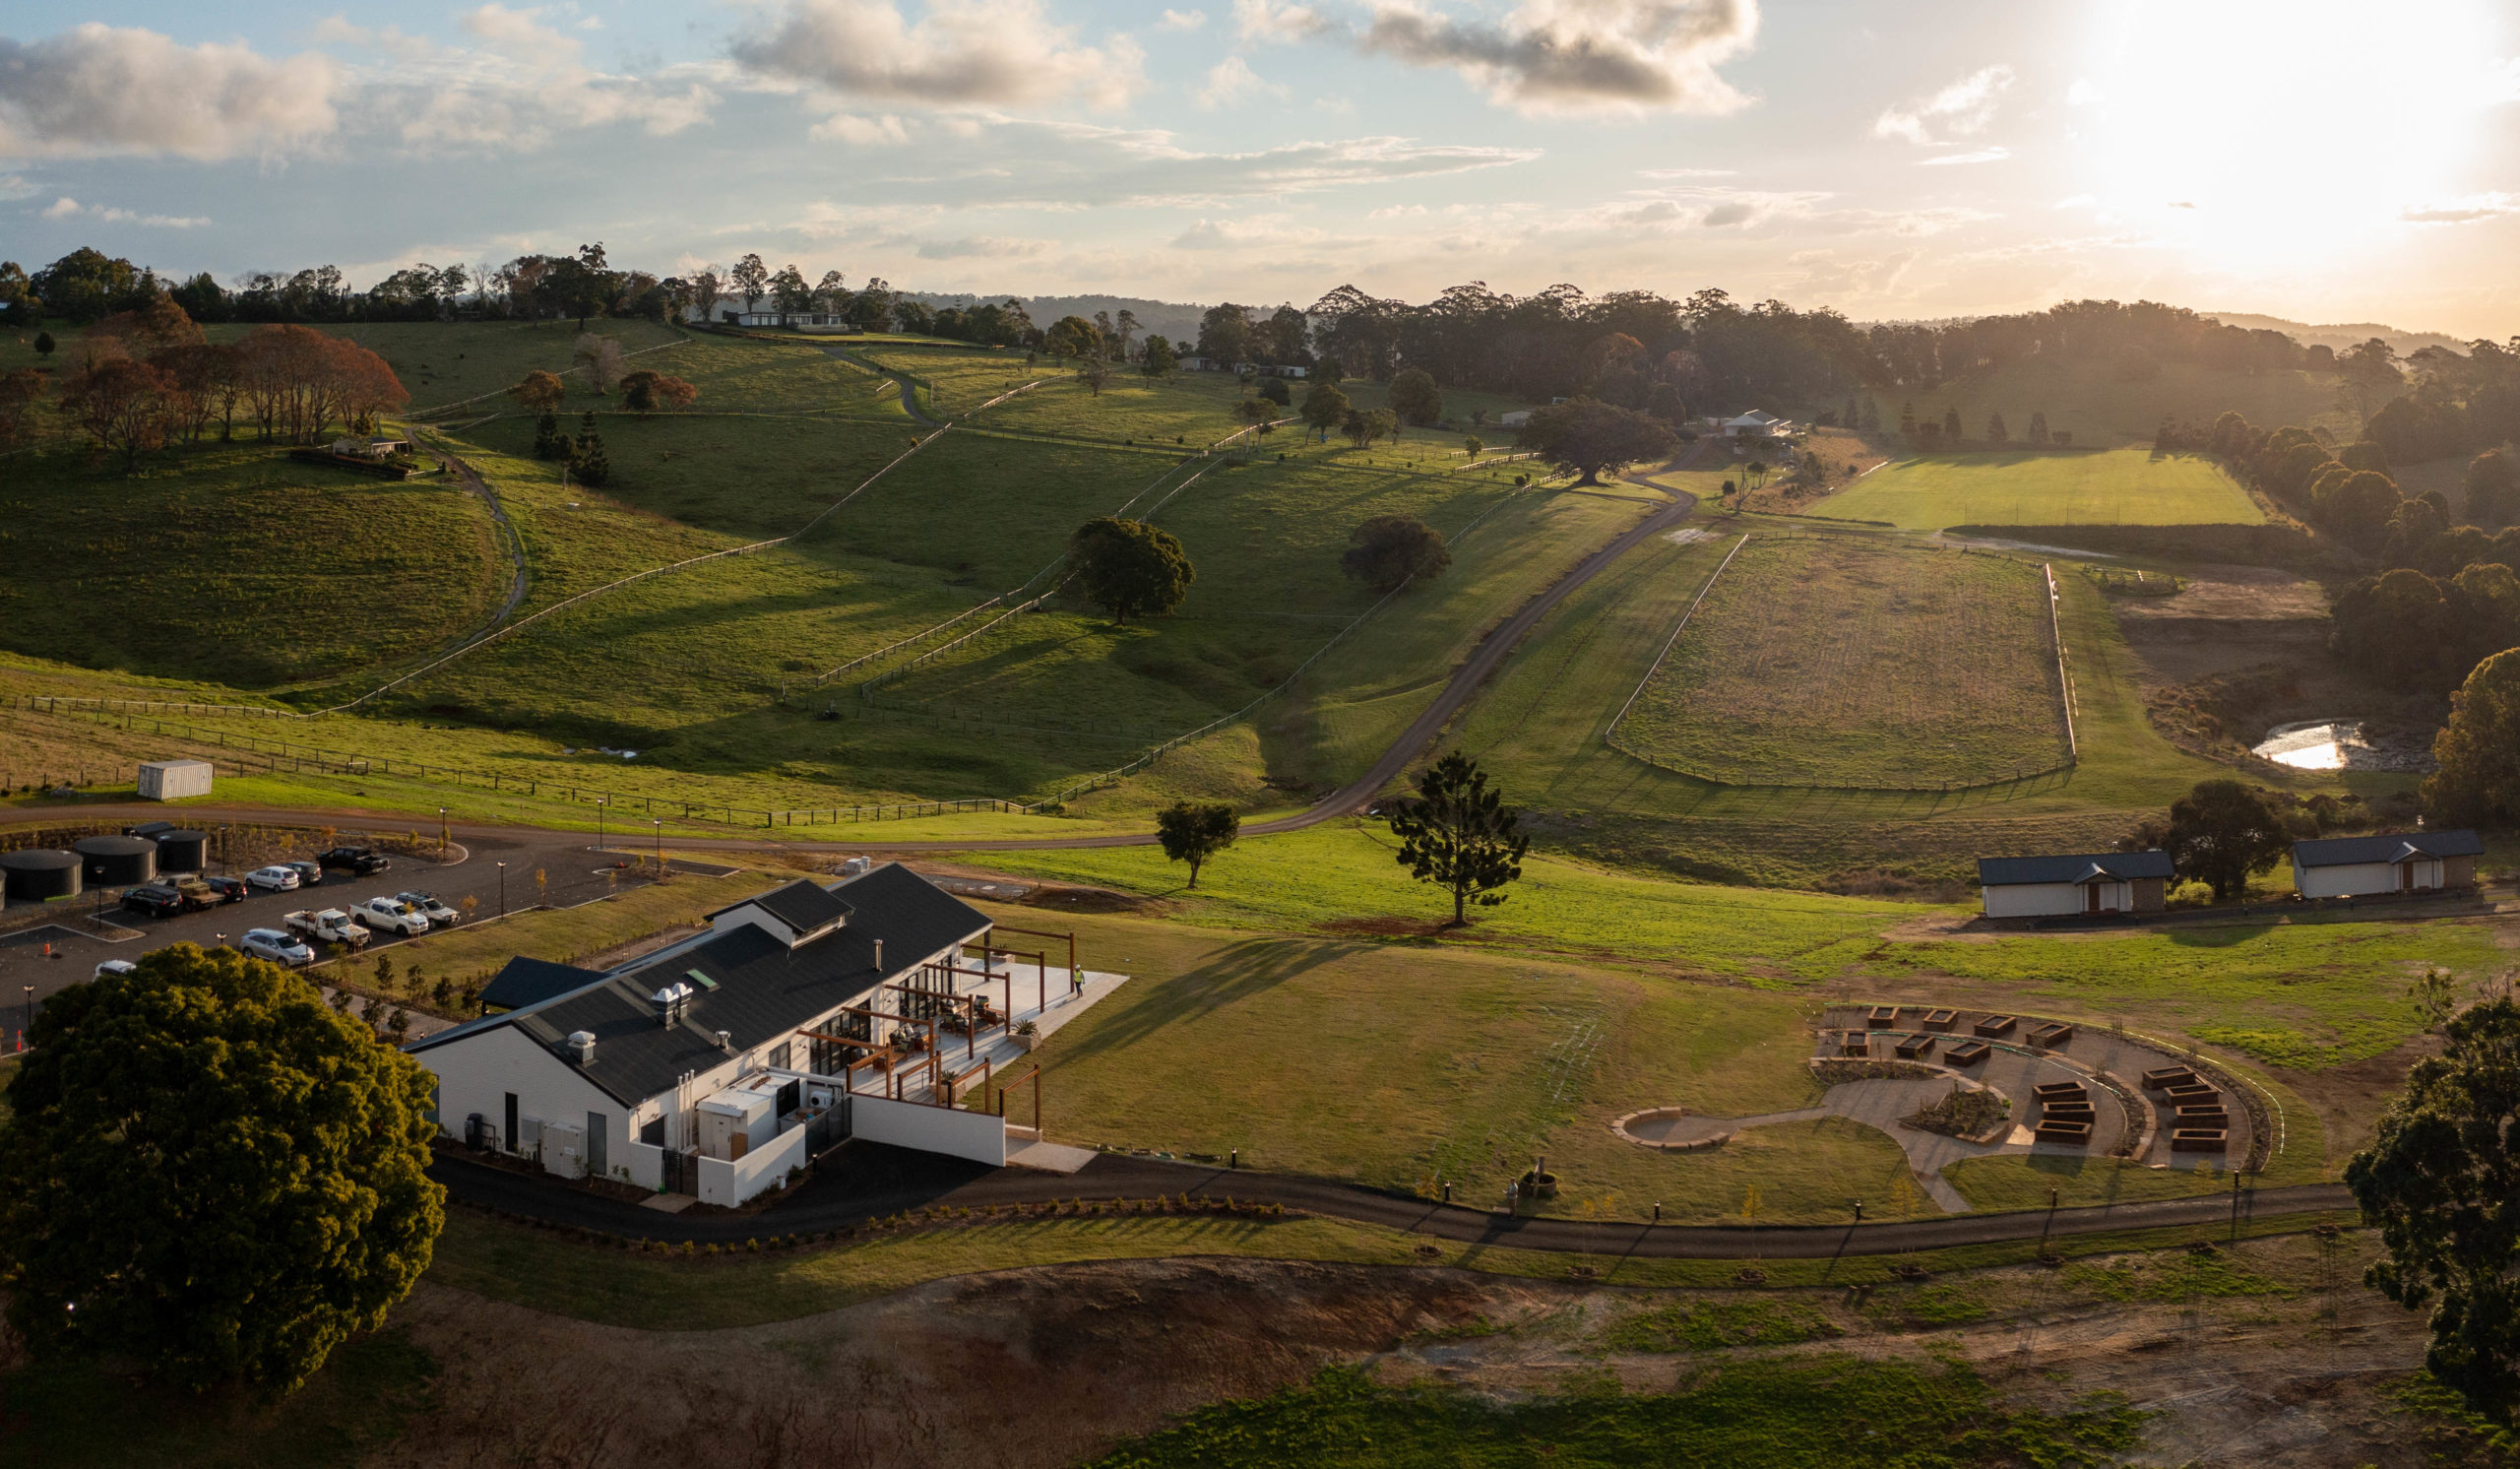 Hazelwood Retreat, a new luxury destination set on a 75-acre wagyu and polo farm Australia's Scenic Rim, will transport visitors to a place of wide-open spaces and fresh country air.